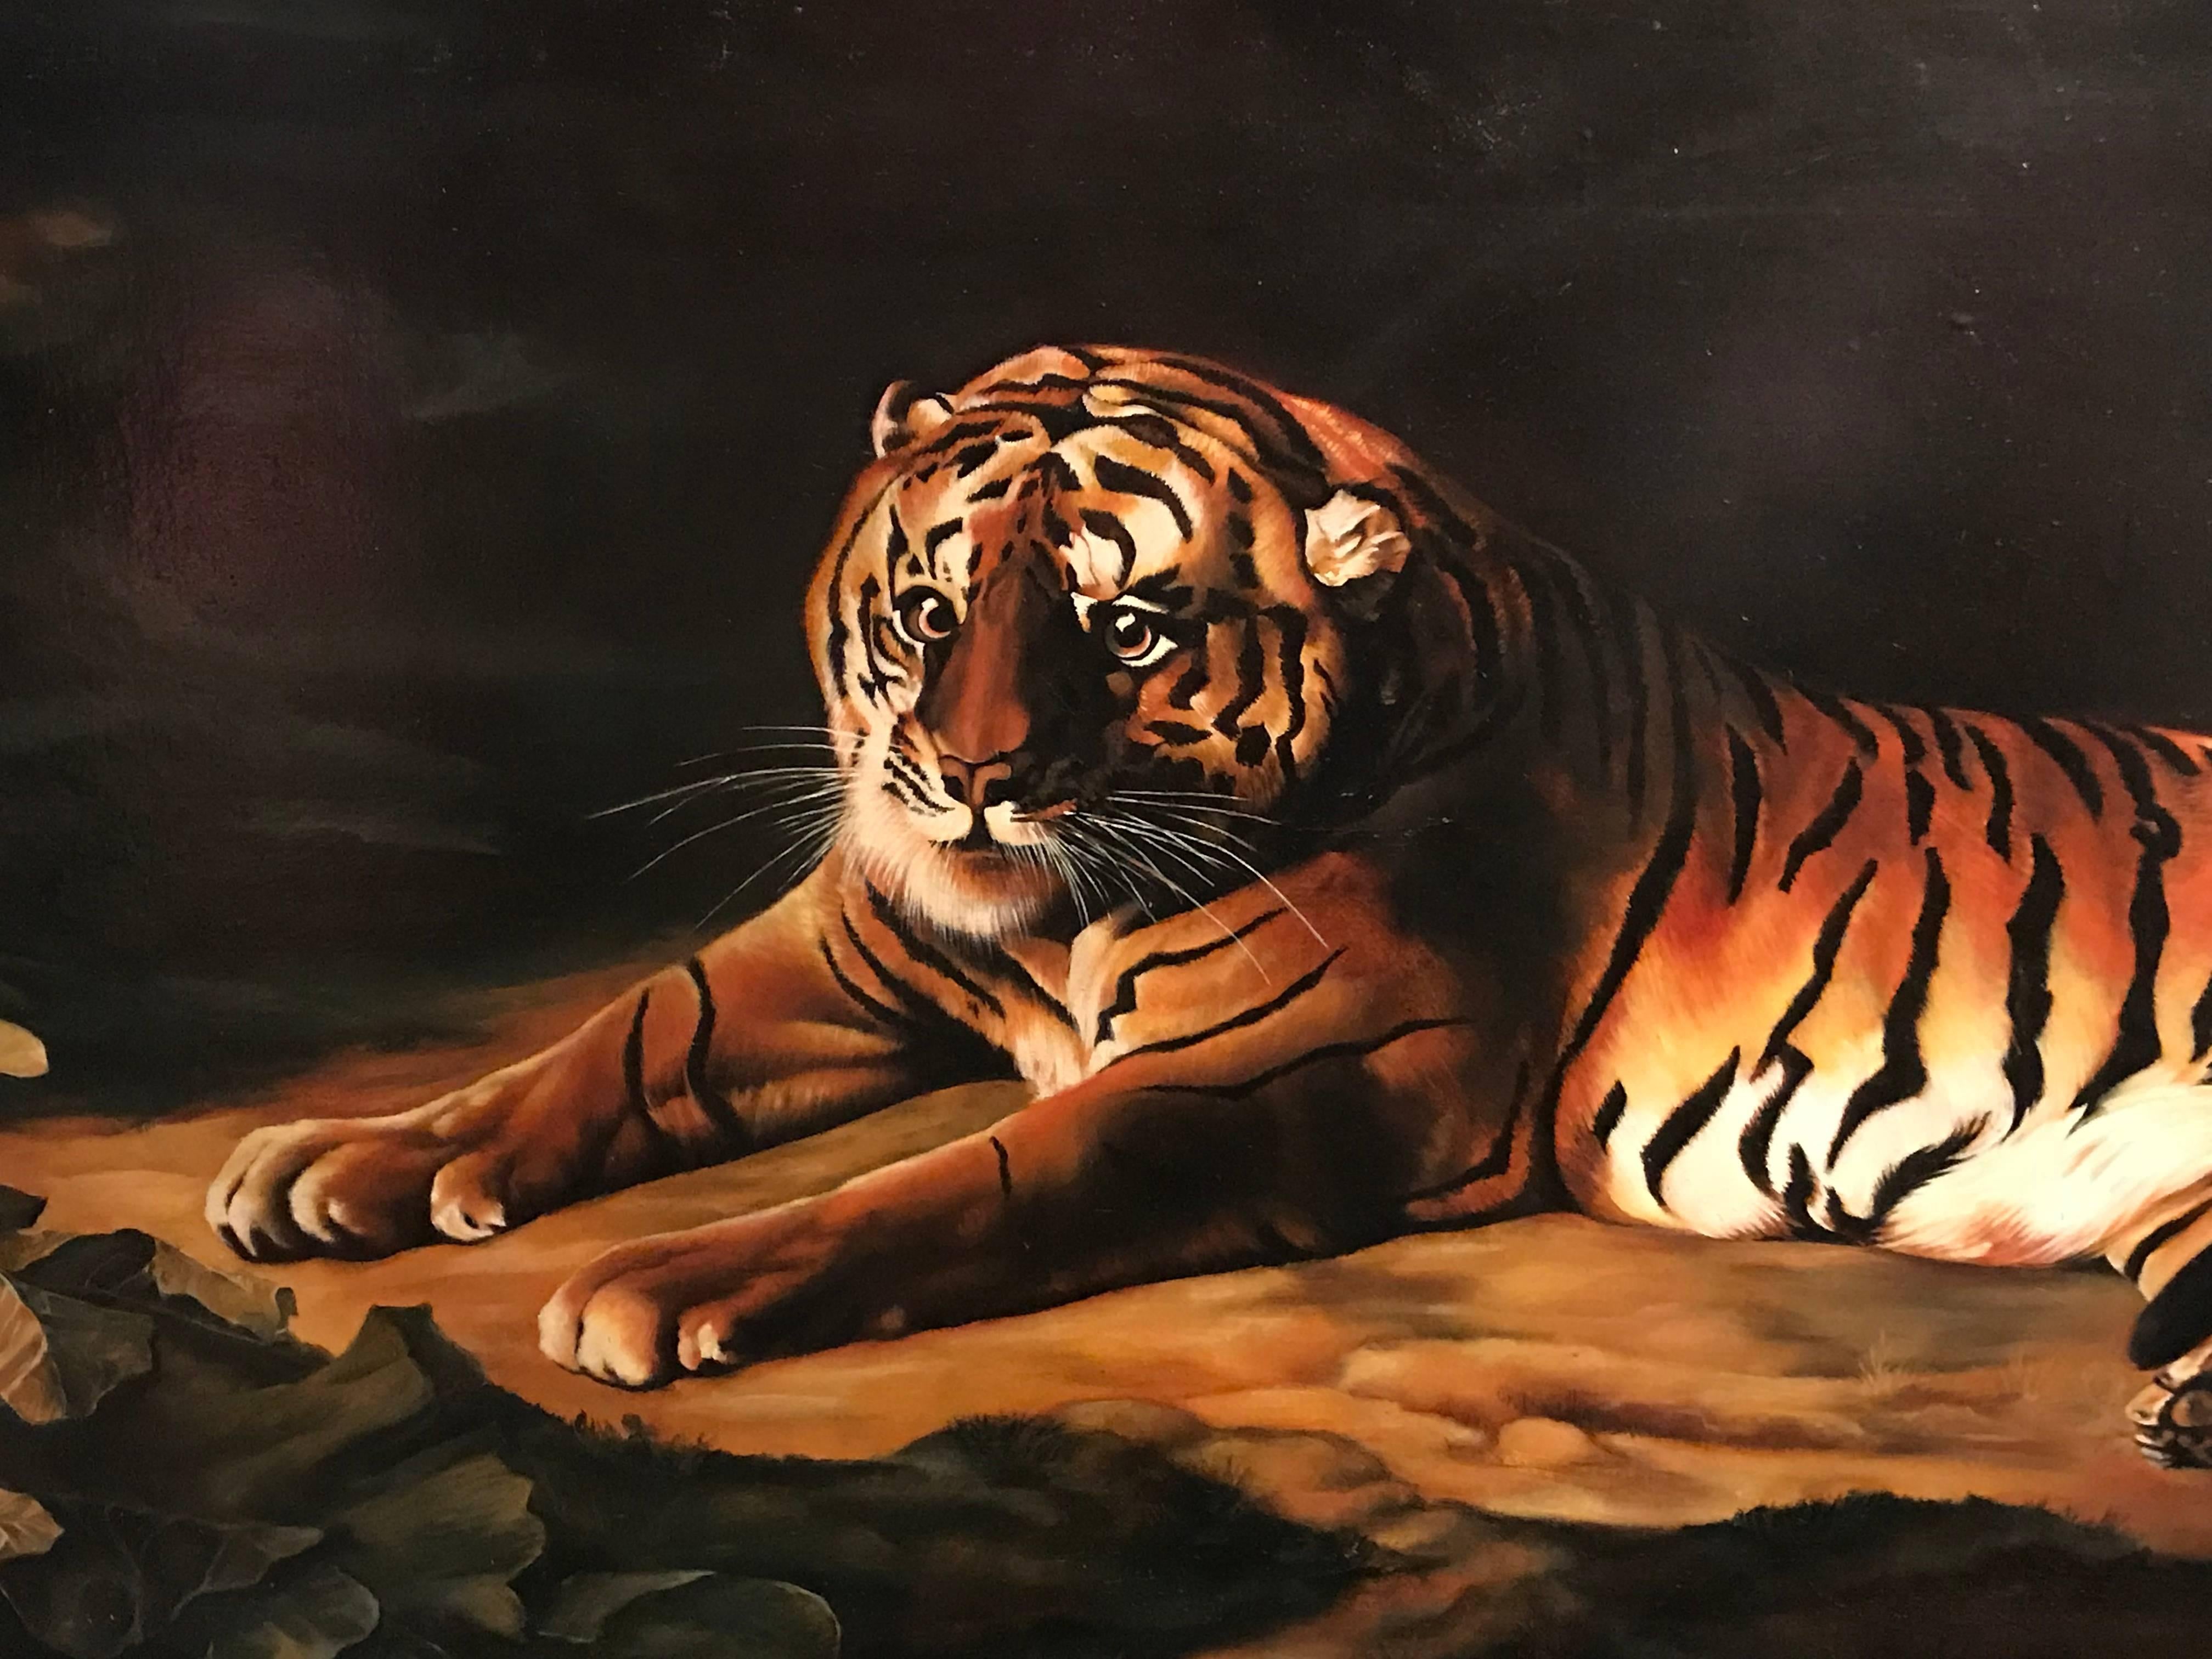 The Tiger
British School, circa 1980's
after George Stubbs, c.1760
oil painting on canvas, framed

framed: 26 x 50 inches

Stunning oil painting on canvas, painted on a huge scale (the frame measures 26 x 50 inches) depicting this majestic Bengal